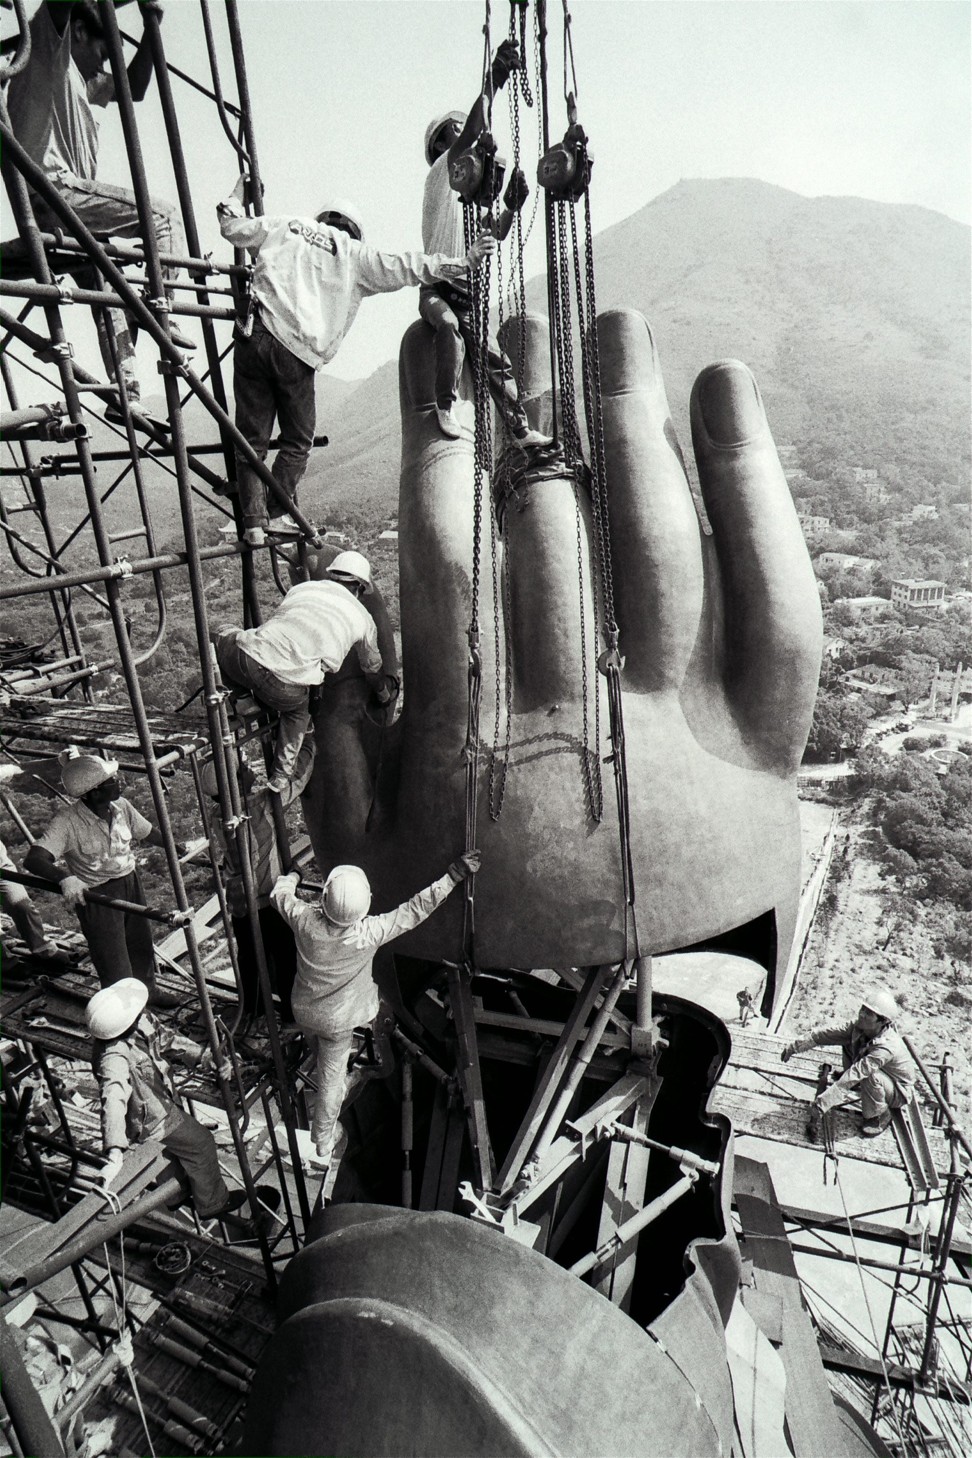 Construction workers manoeuvre one of the Big Buddha’s huge hands into place. Photo: SCMP